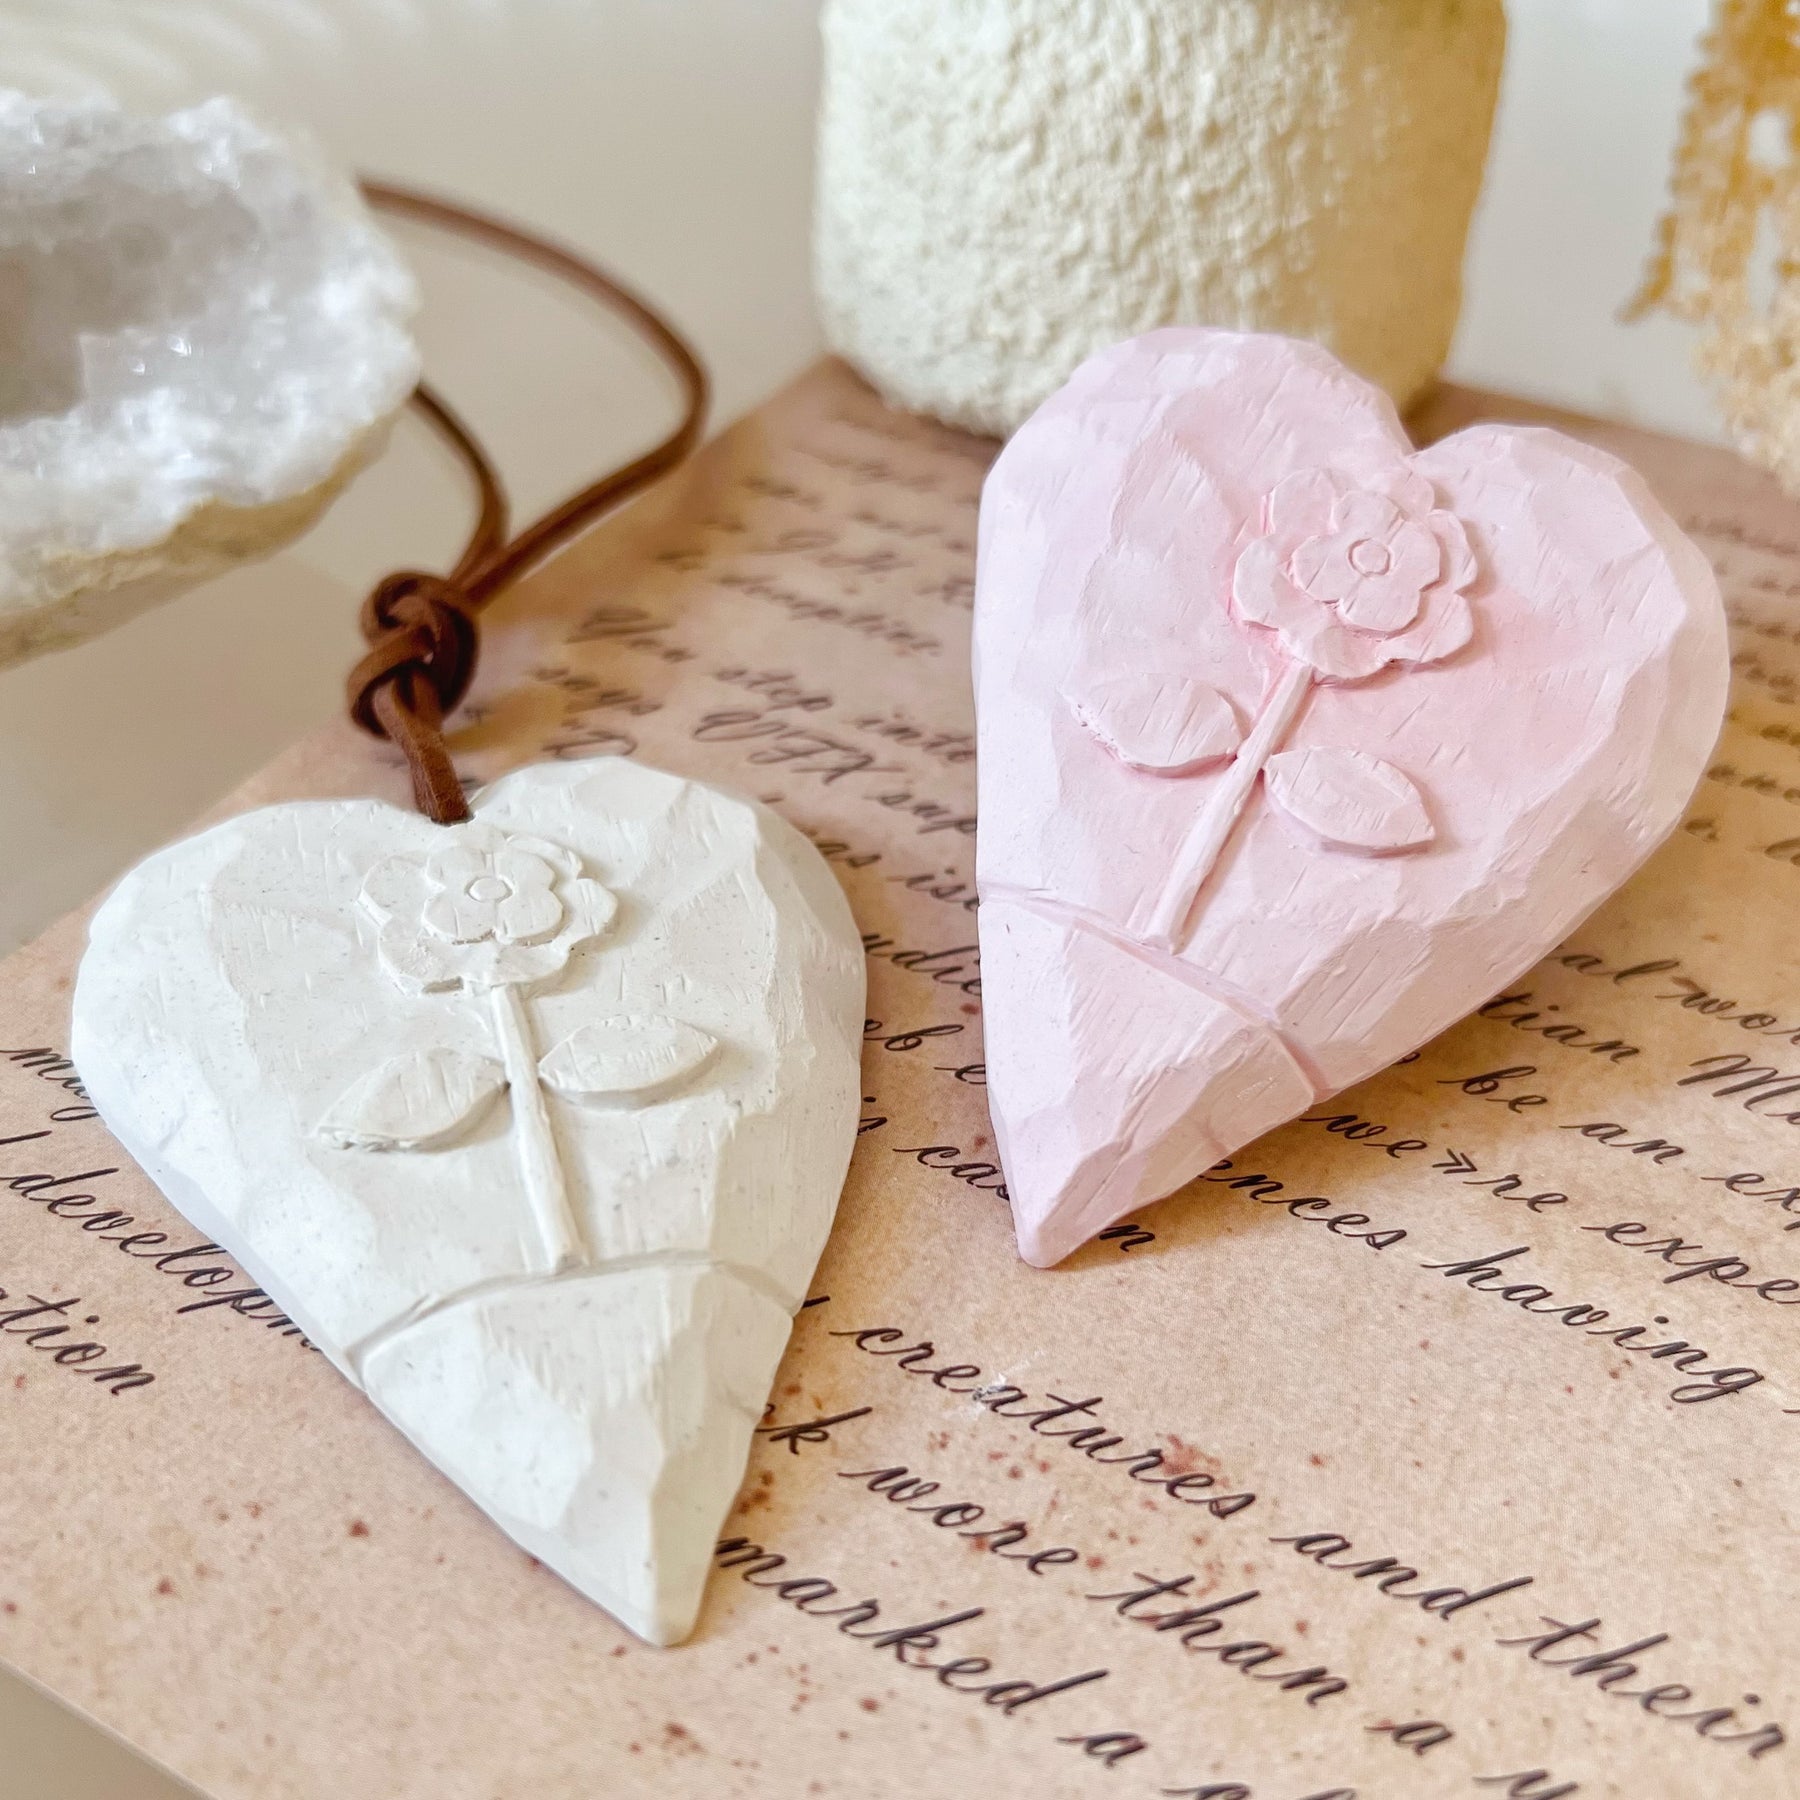 Carved Heart with Flower Car Air Freshener - LMJ Candles